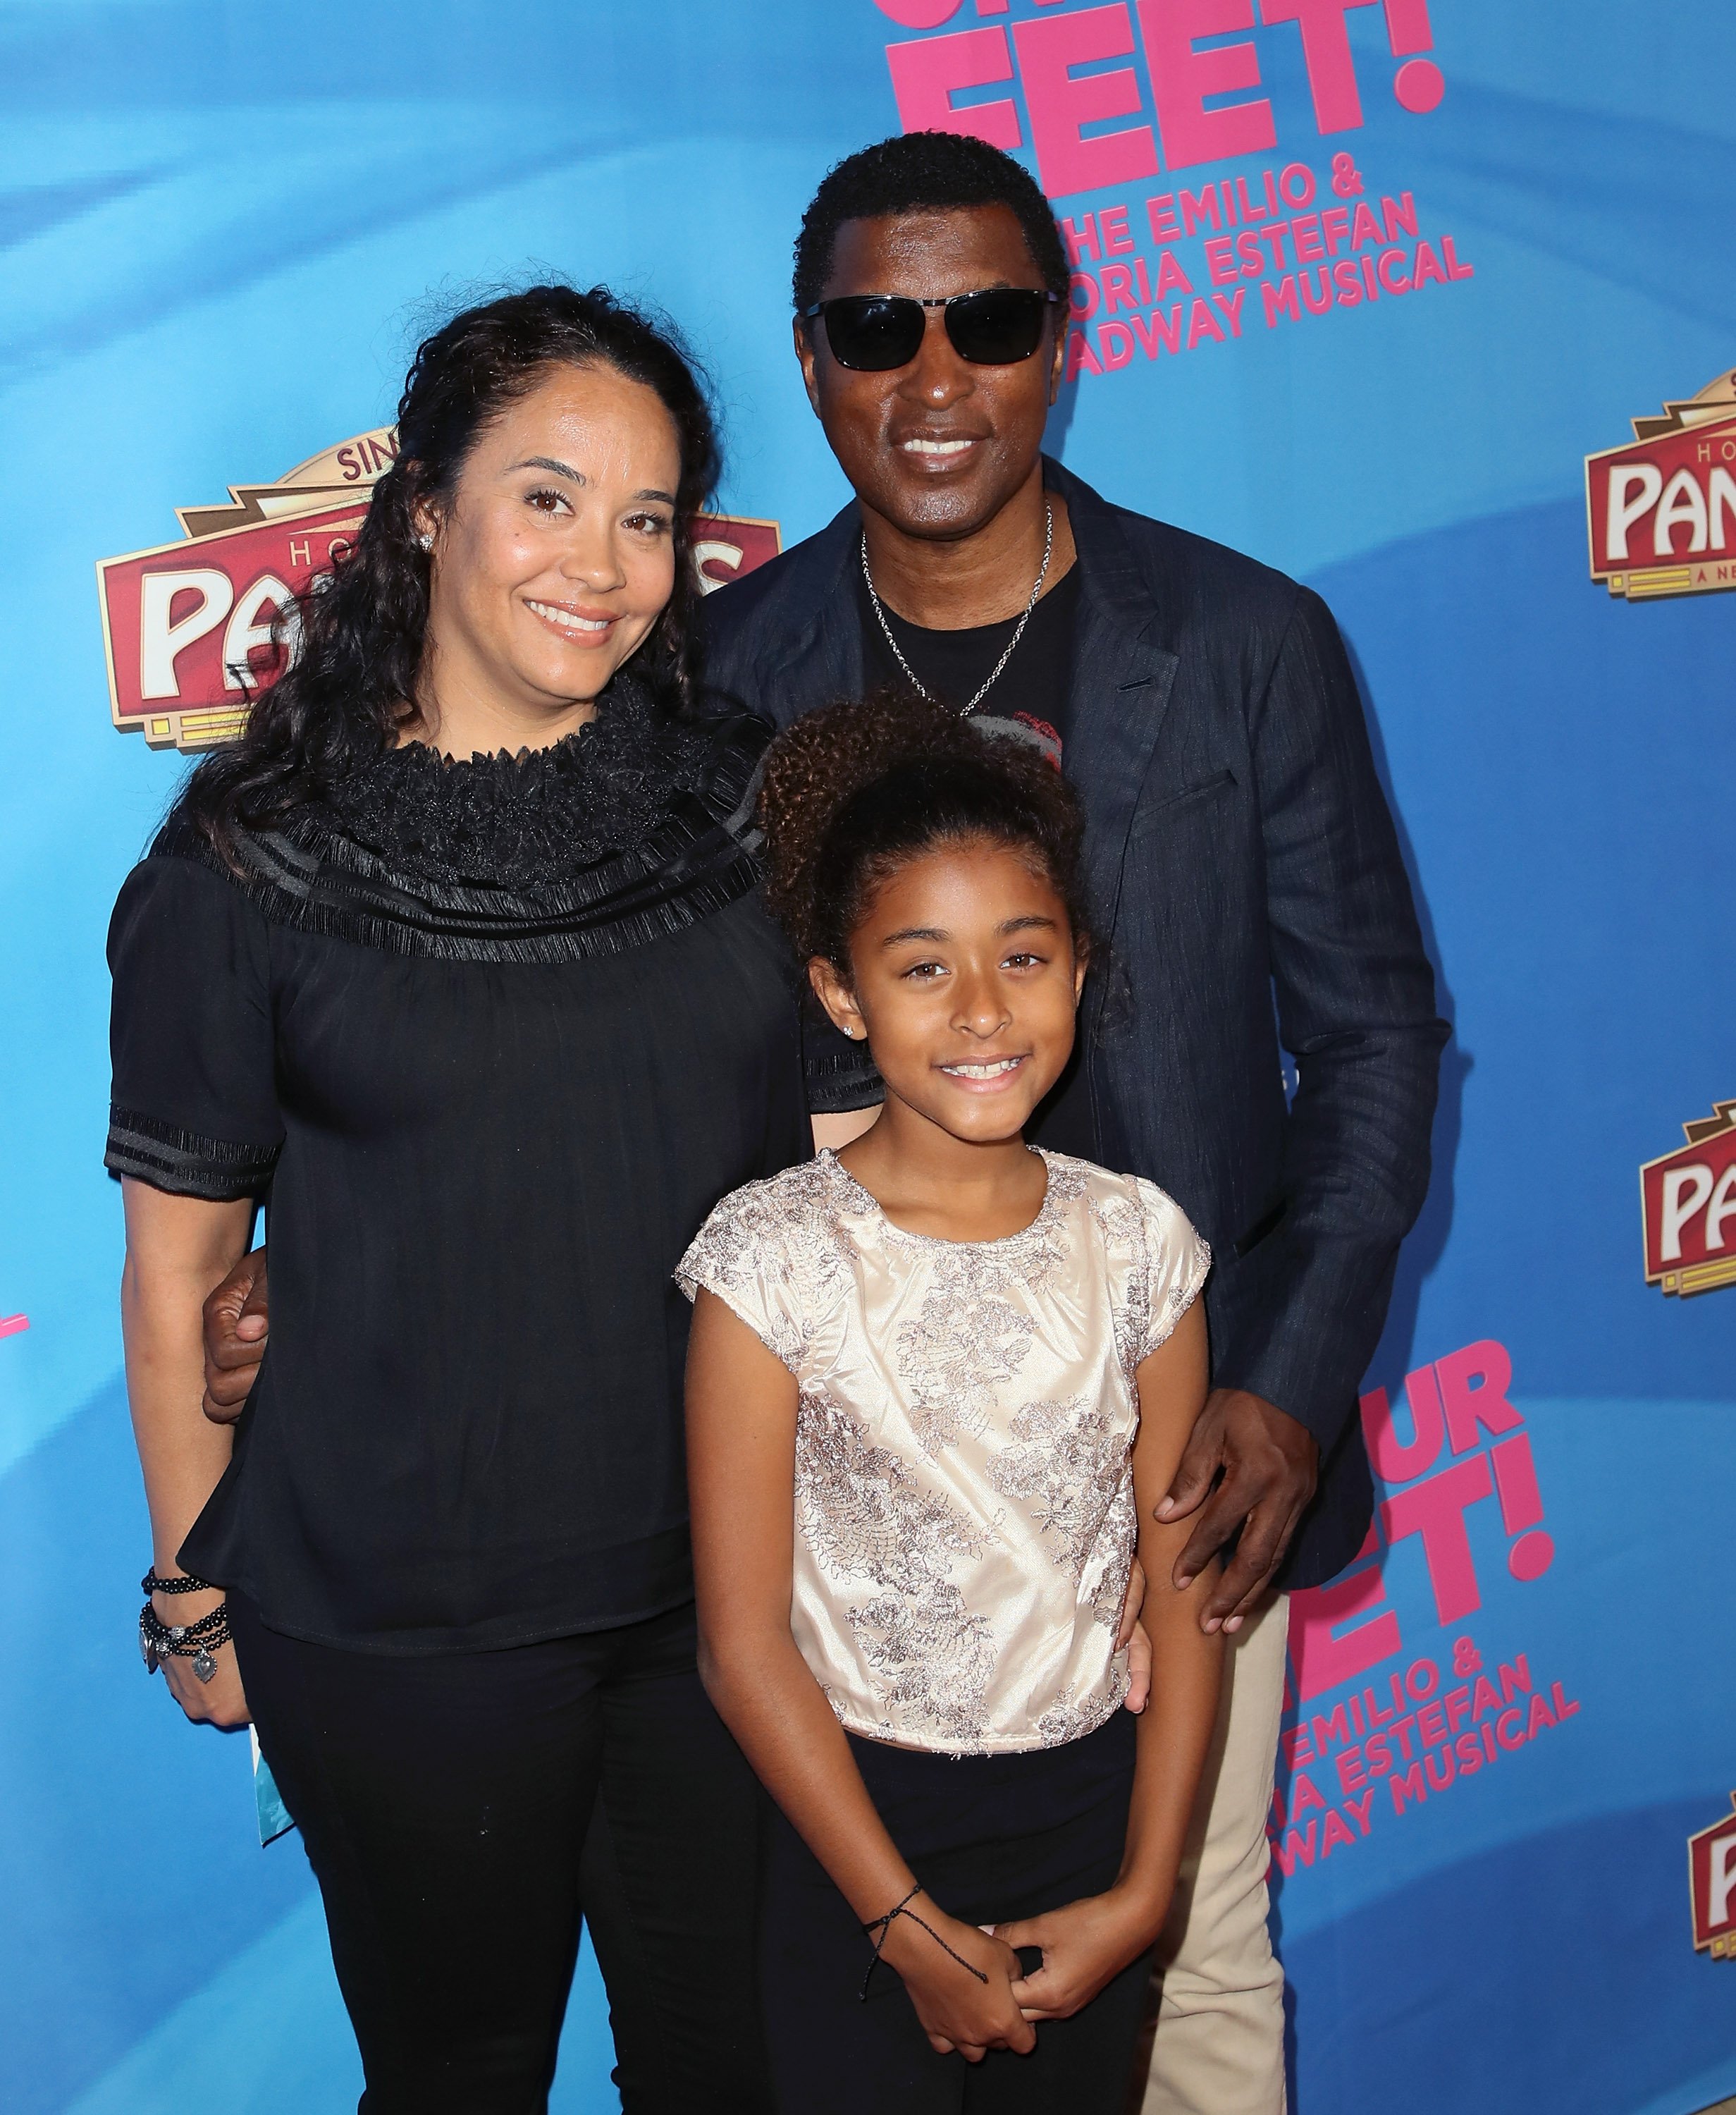 Babyface, his wife, Nicole Patenburg and their daughter, Peyton at the celebration of "On Your Feet" Broadway musical in July 2018. | Photo: Getty Images